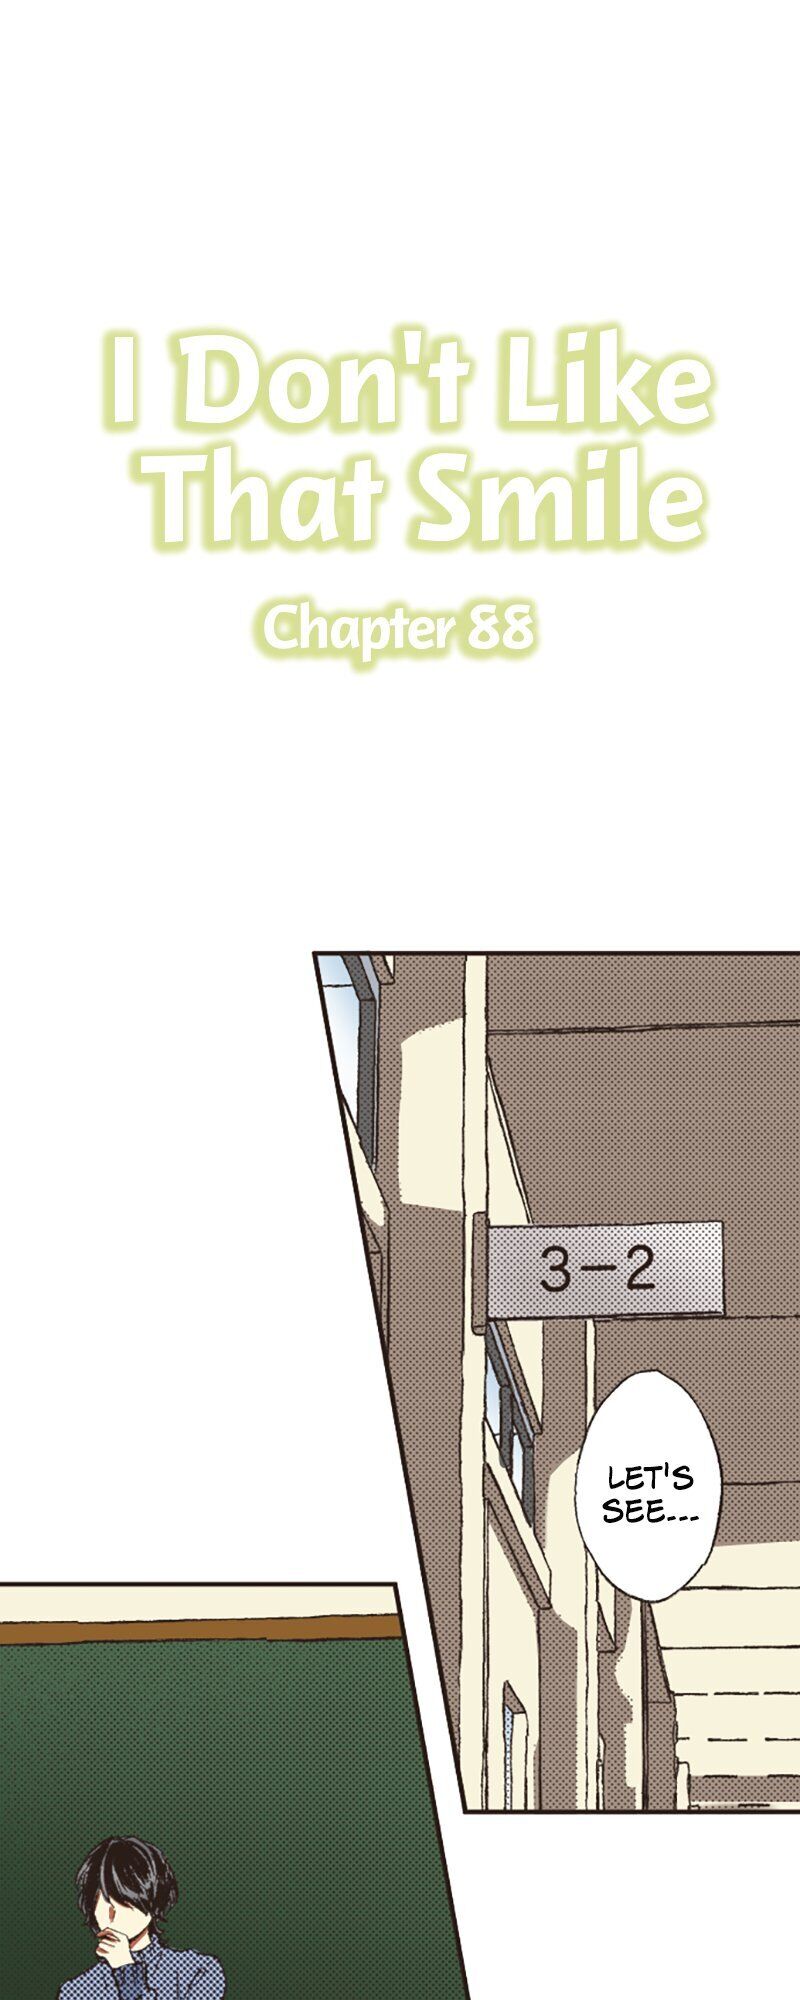 I Don’t Like That Smile Chapter 88 - Page 0